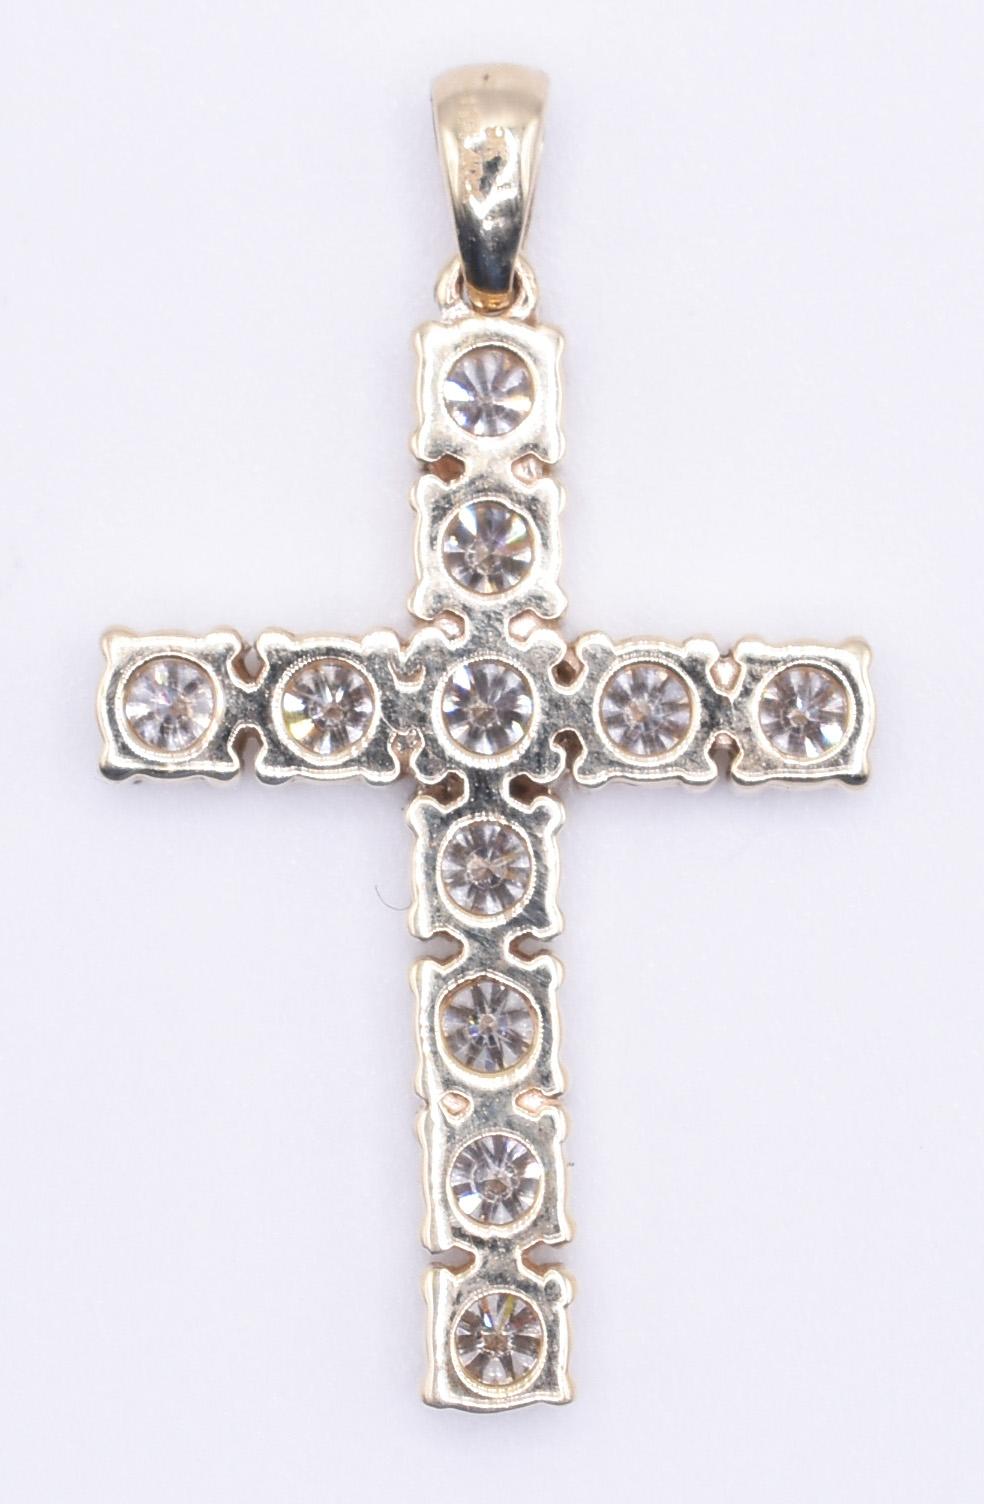 For sale is a lovely 18k yellow gold and diamond cross pendant, featuring 11 round cut natural diamonds, totaling 1.40ct, ranging from H-I in colour, of SI clarity.

Metal: 18k Yellow Gold
Total Carat Weight: 1.40ct 
Colour: H-I
Clarity: SI